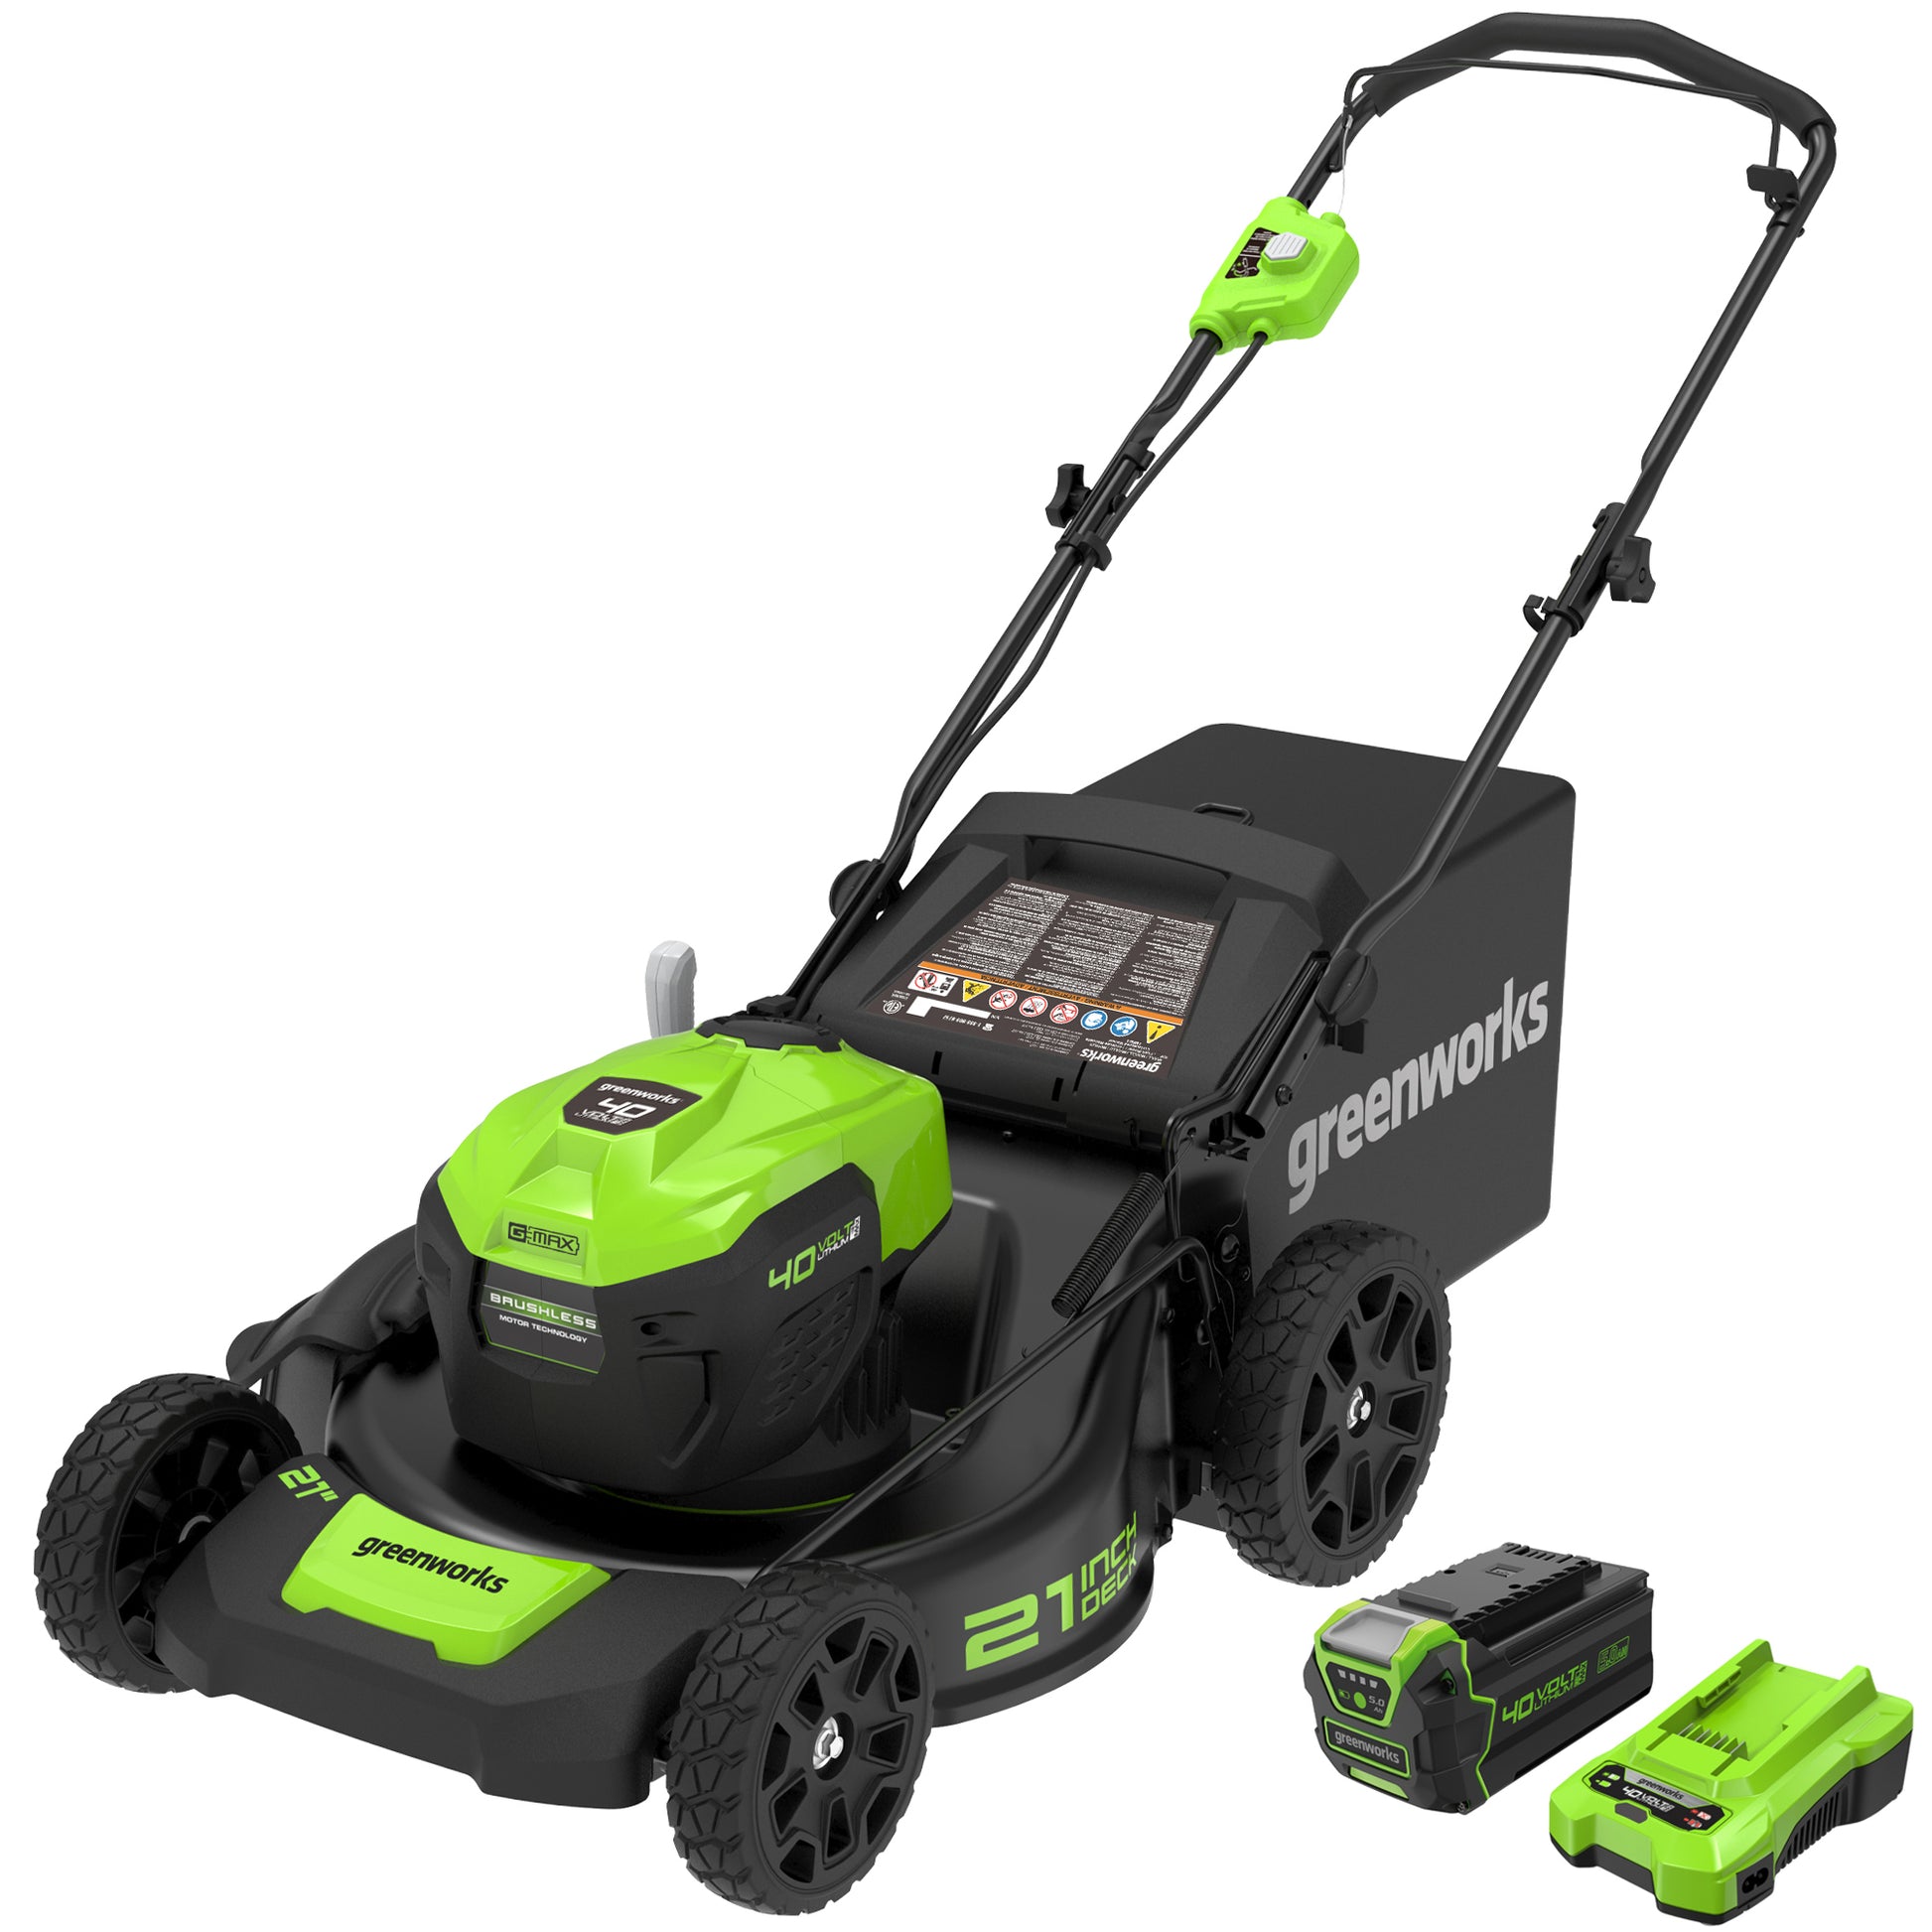 Greenworks 80V 21 Brushless Cordless (Push) Lawn Mower (75+ Compatible Tools), 5.0Ah Battery and Charger Included